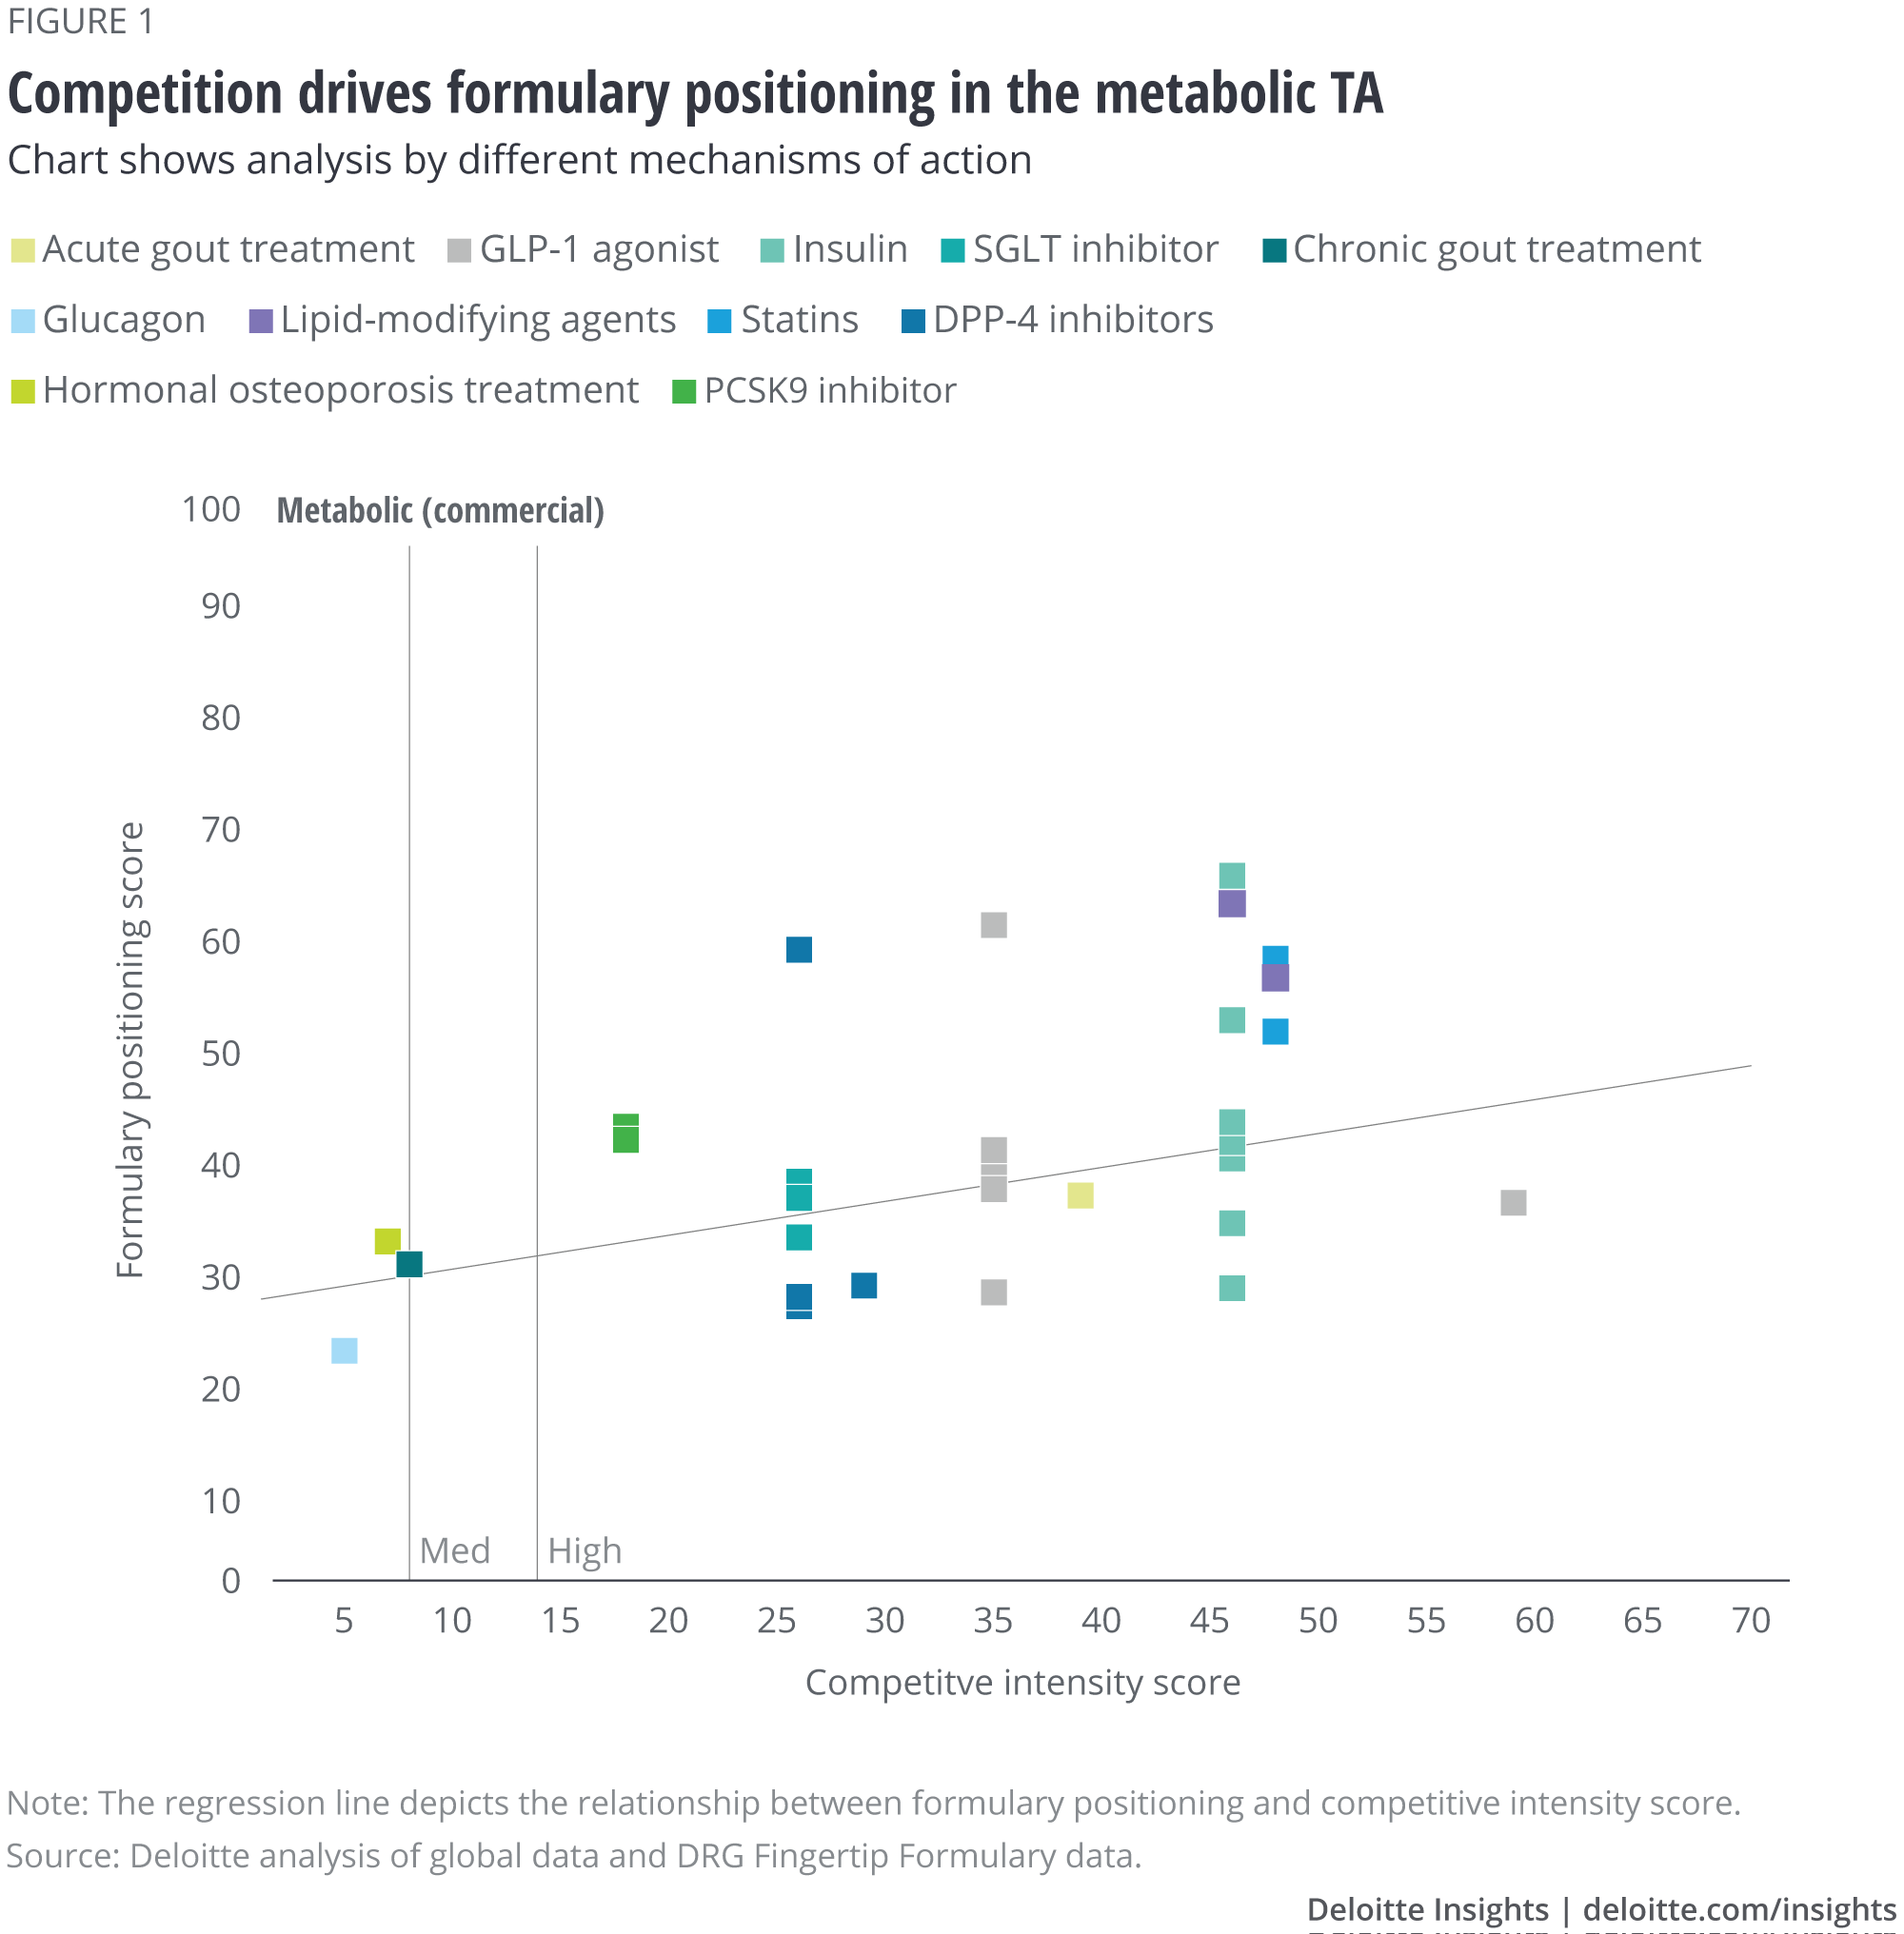 Competition drives formulary positioning in the metabolic TA